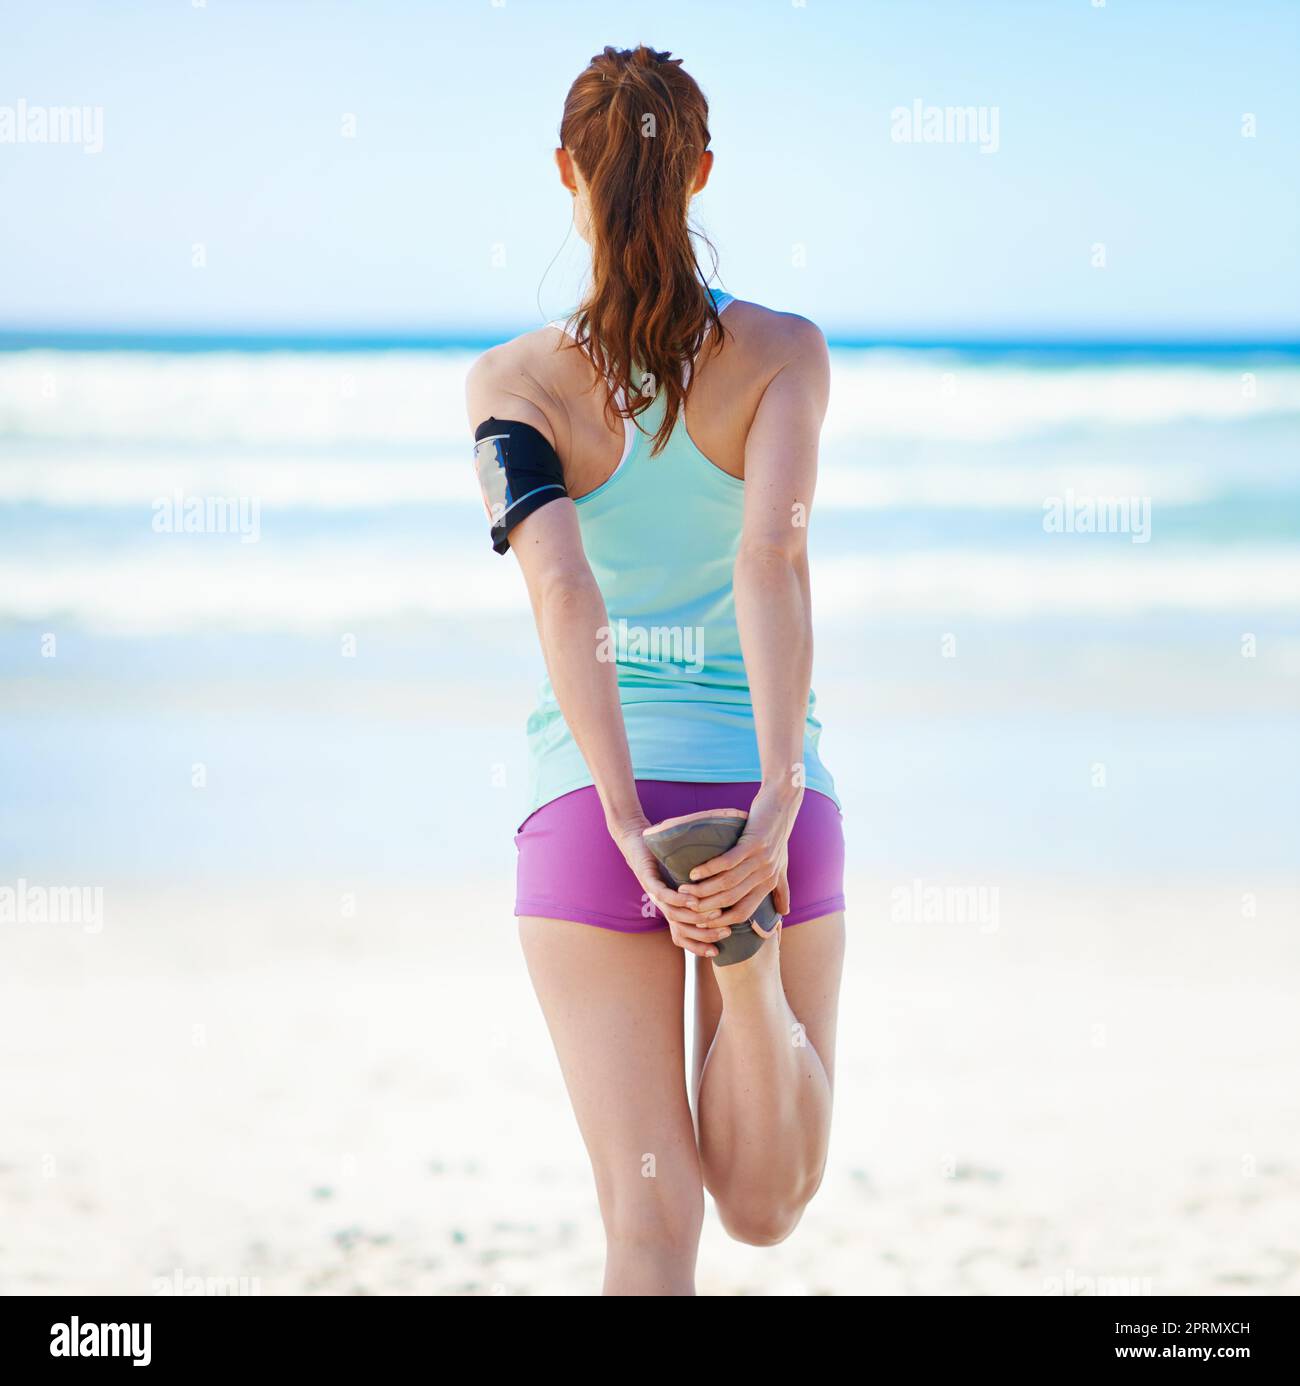 Stretching her muscles. Rearview shot of a young woman stretching before a work out on the beach. Stock Photo